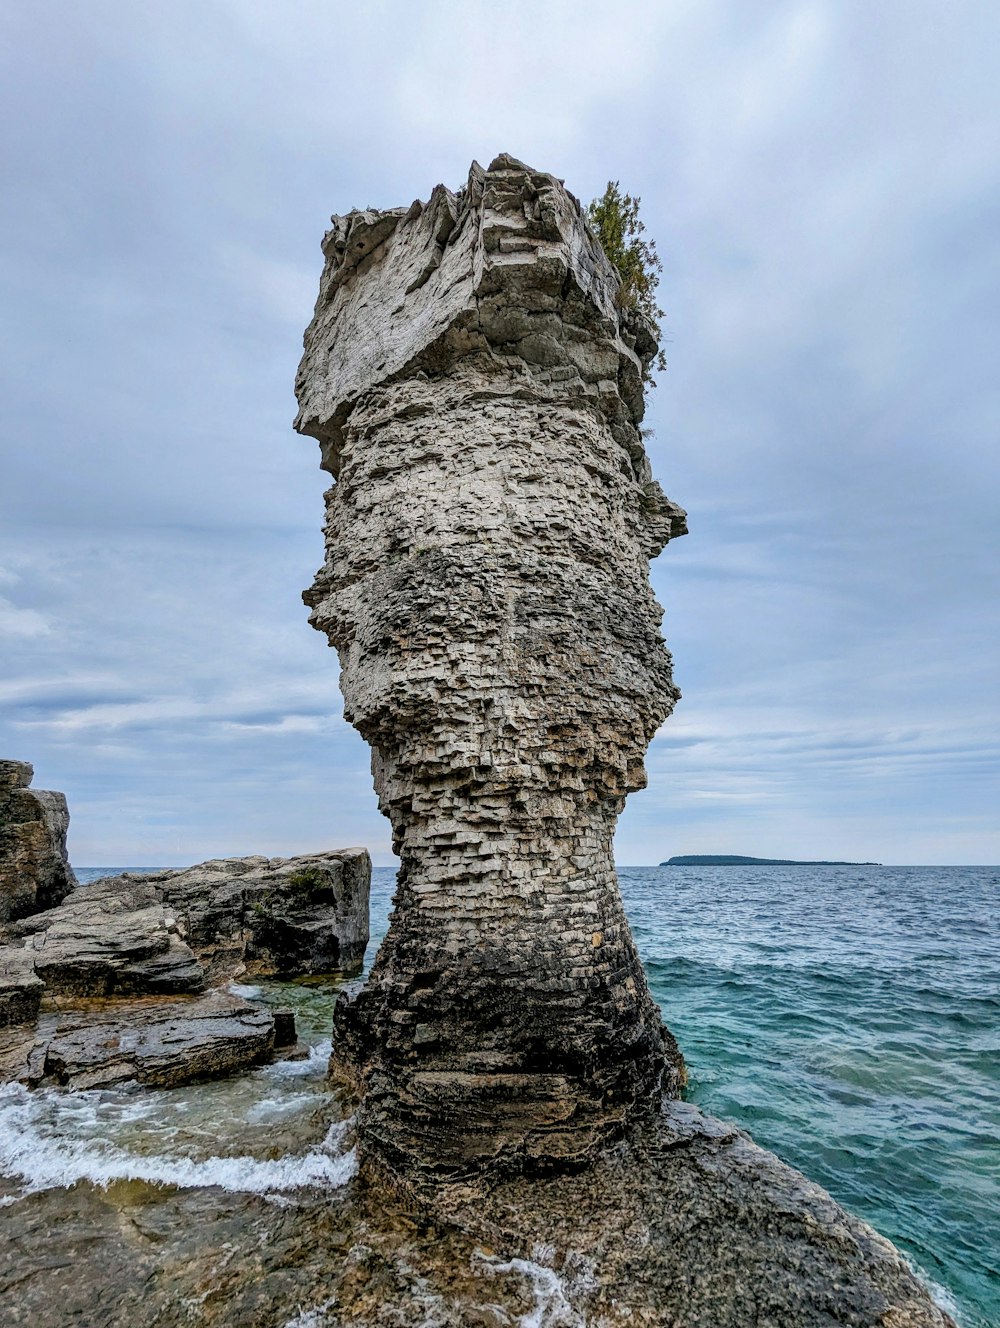 a rock formation in the middle of a body of water